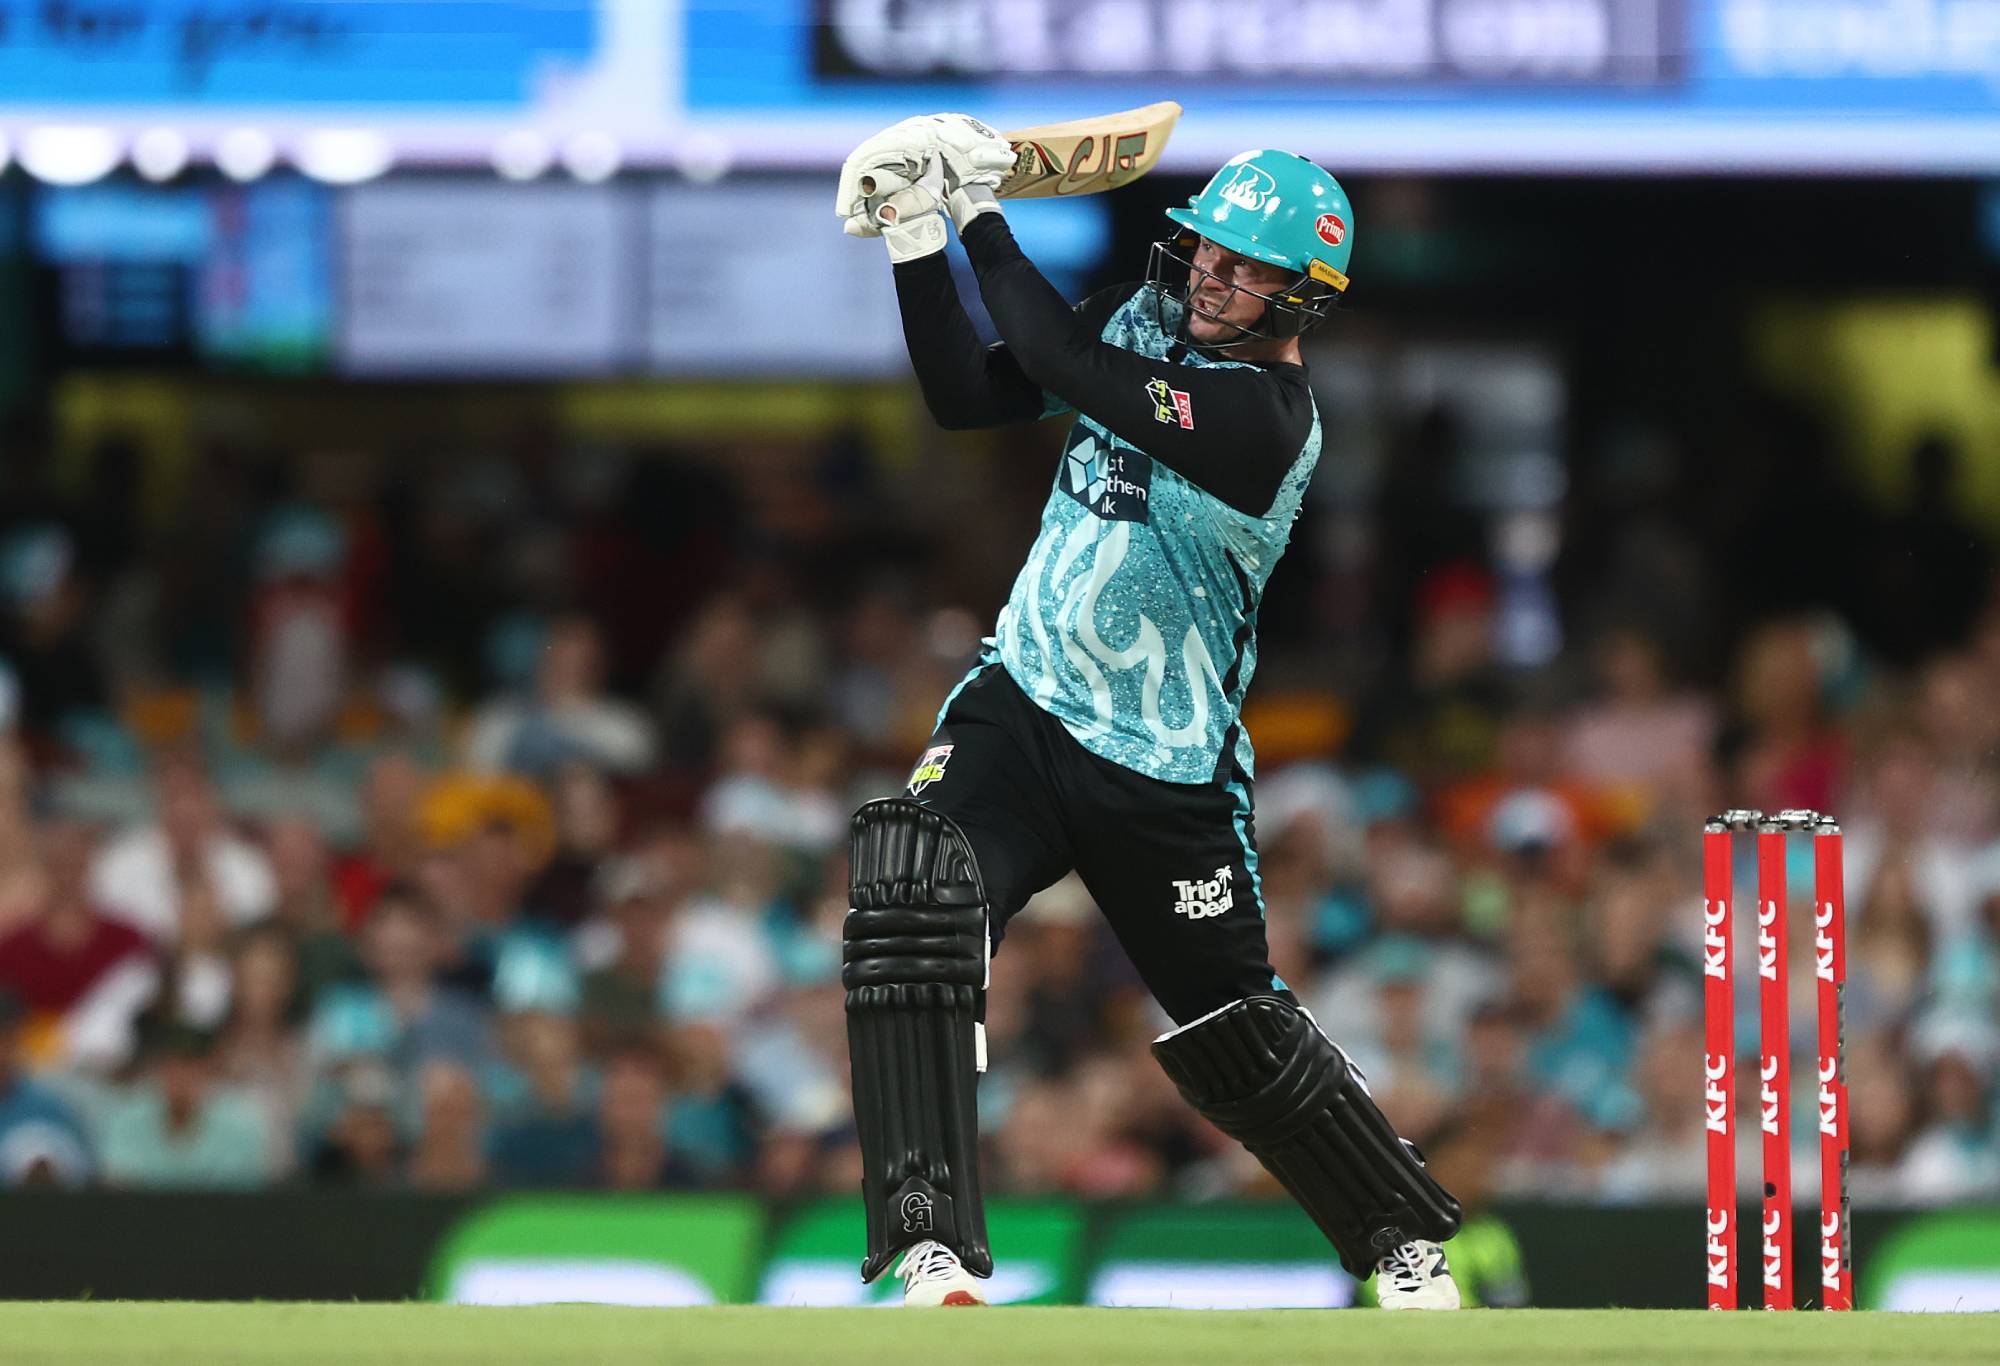 BRISBANE, AUSTRALIA - DECEMBER 07: Colin Munro of the Heat bats during the BBL match between Brisbane Heat and Melbourne Stars at The Gabba, on December 07, 2023, in Brisbane, Australia. (Photo by Chris Hyde - CA/Cricket Australia via Getty Images)